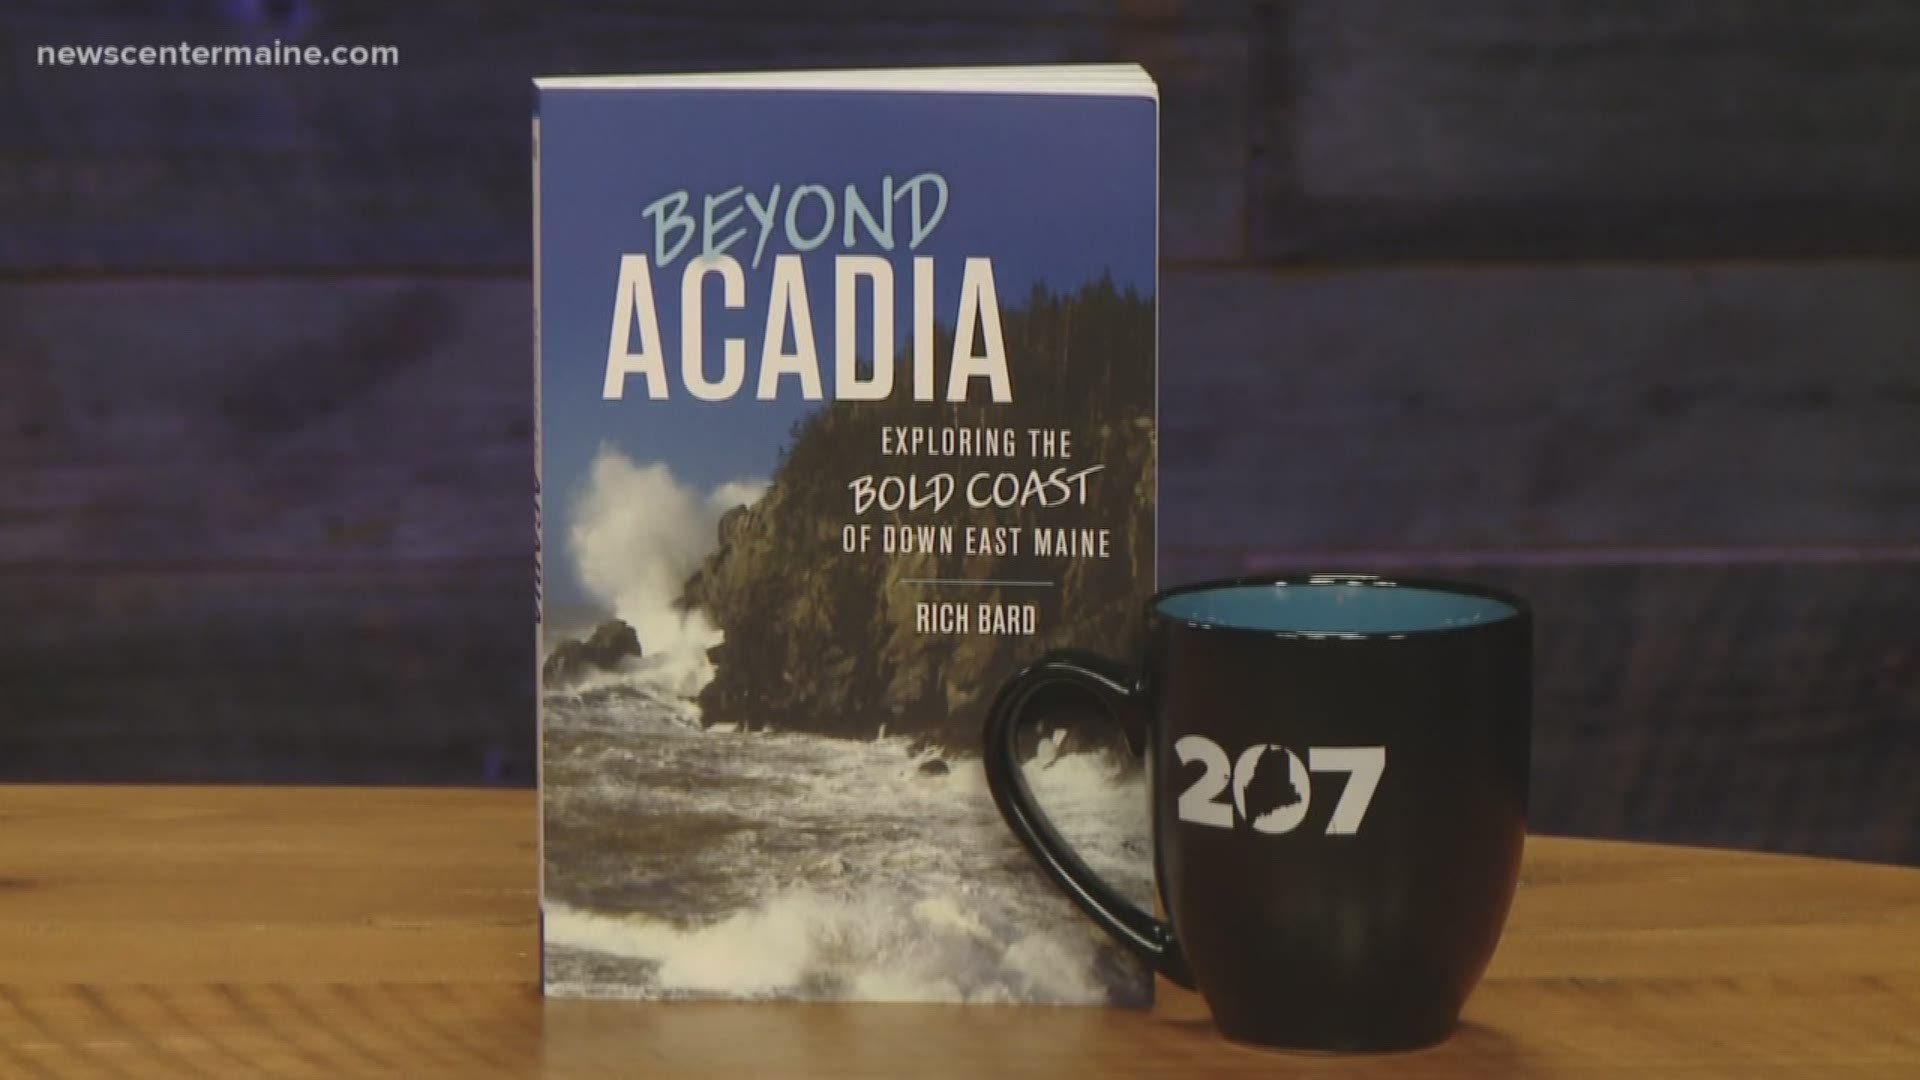 Author Rich Bard says the Bold Coast offers the best of “the real Maine”.